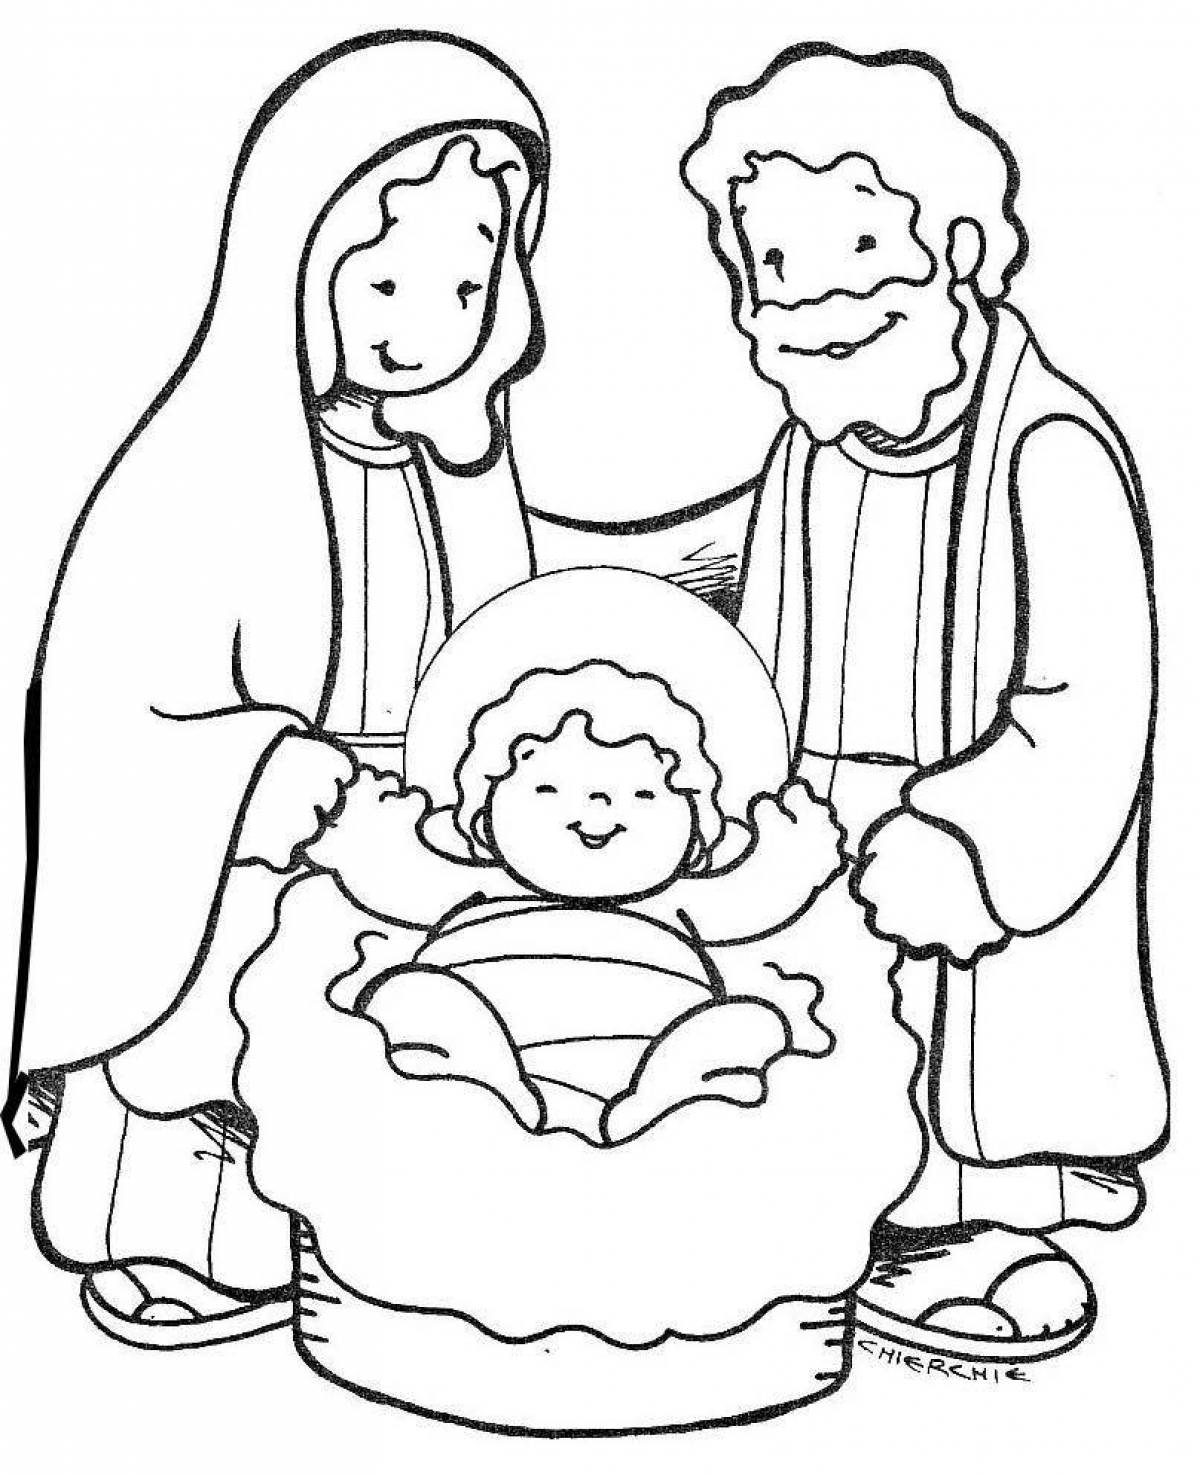 Coloring page magnificent birth of christ